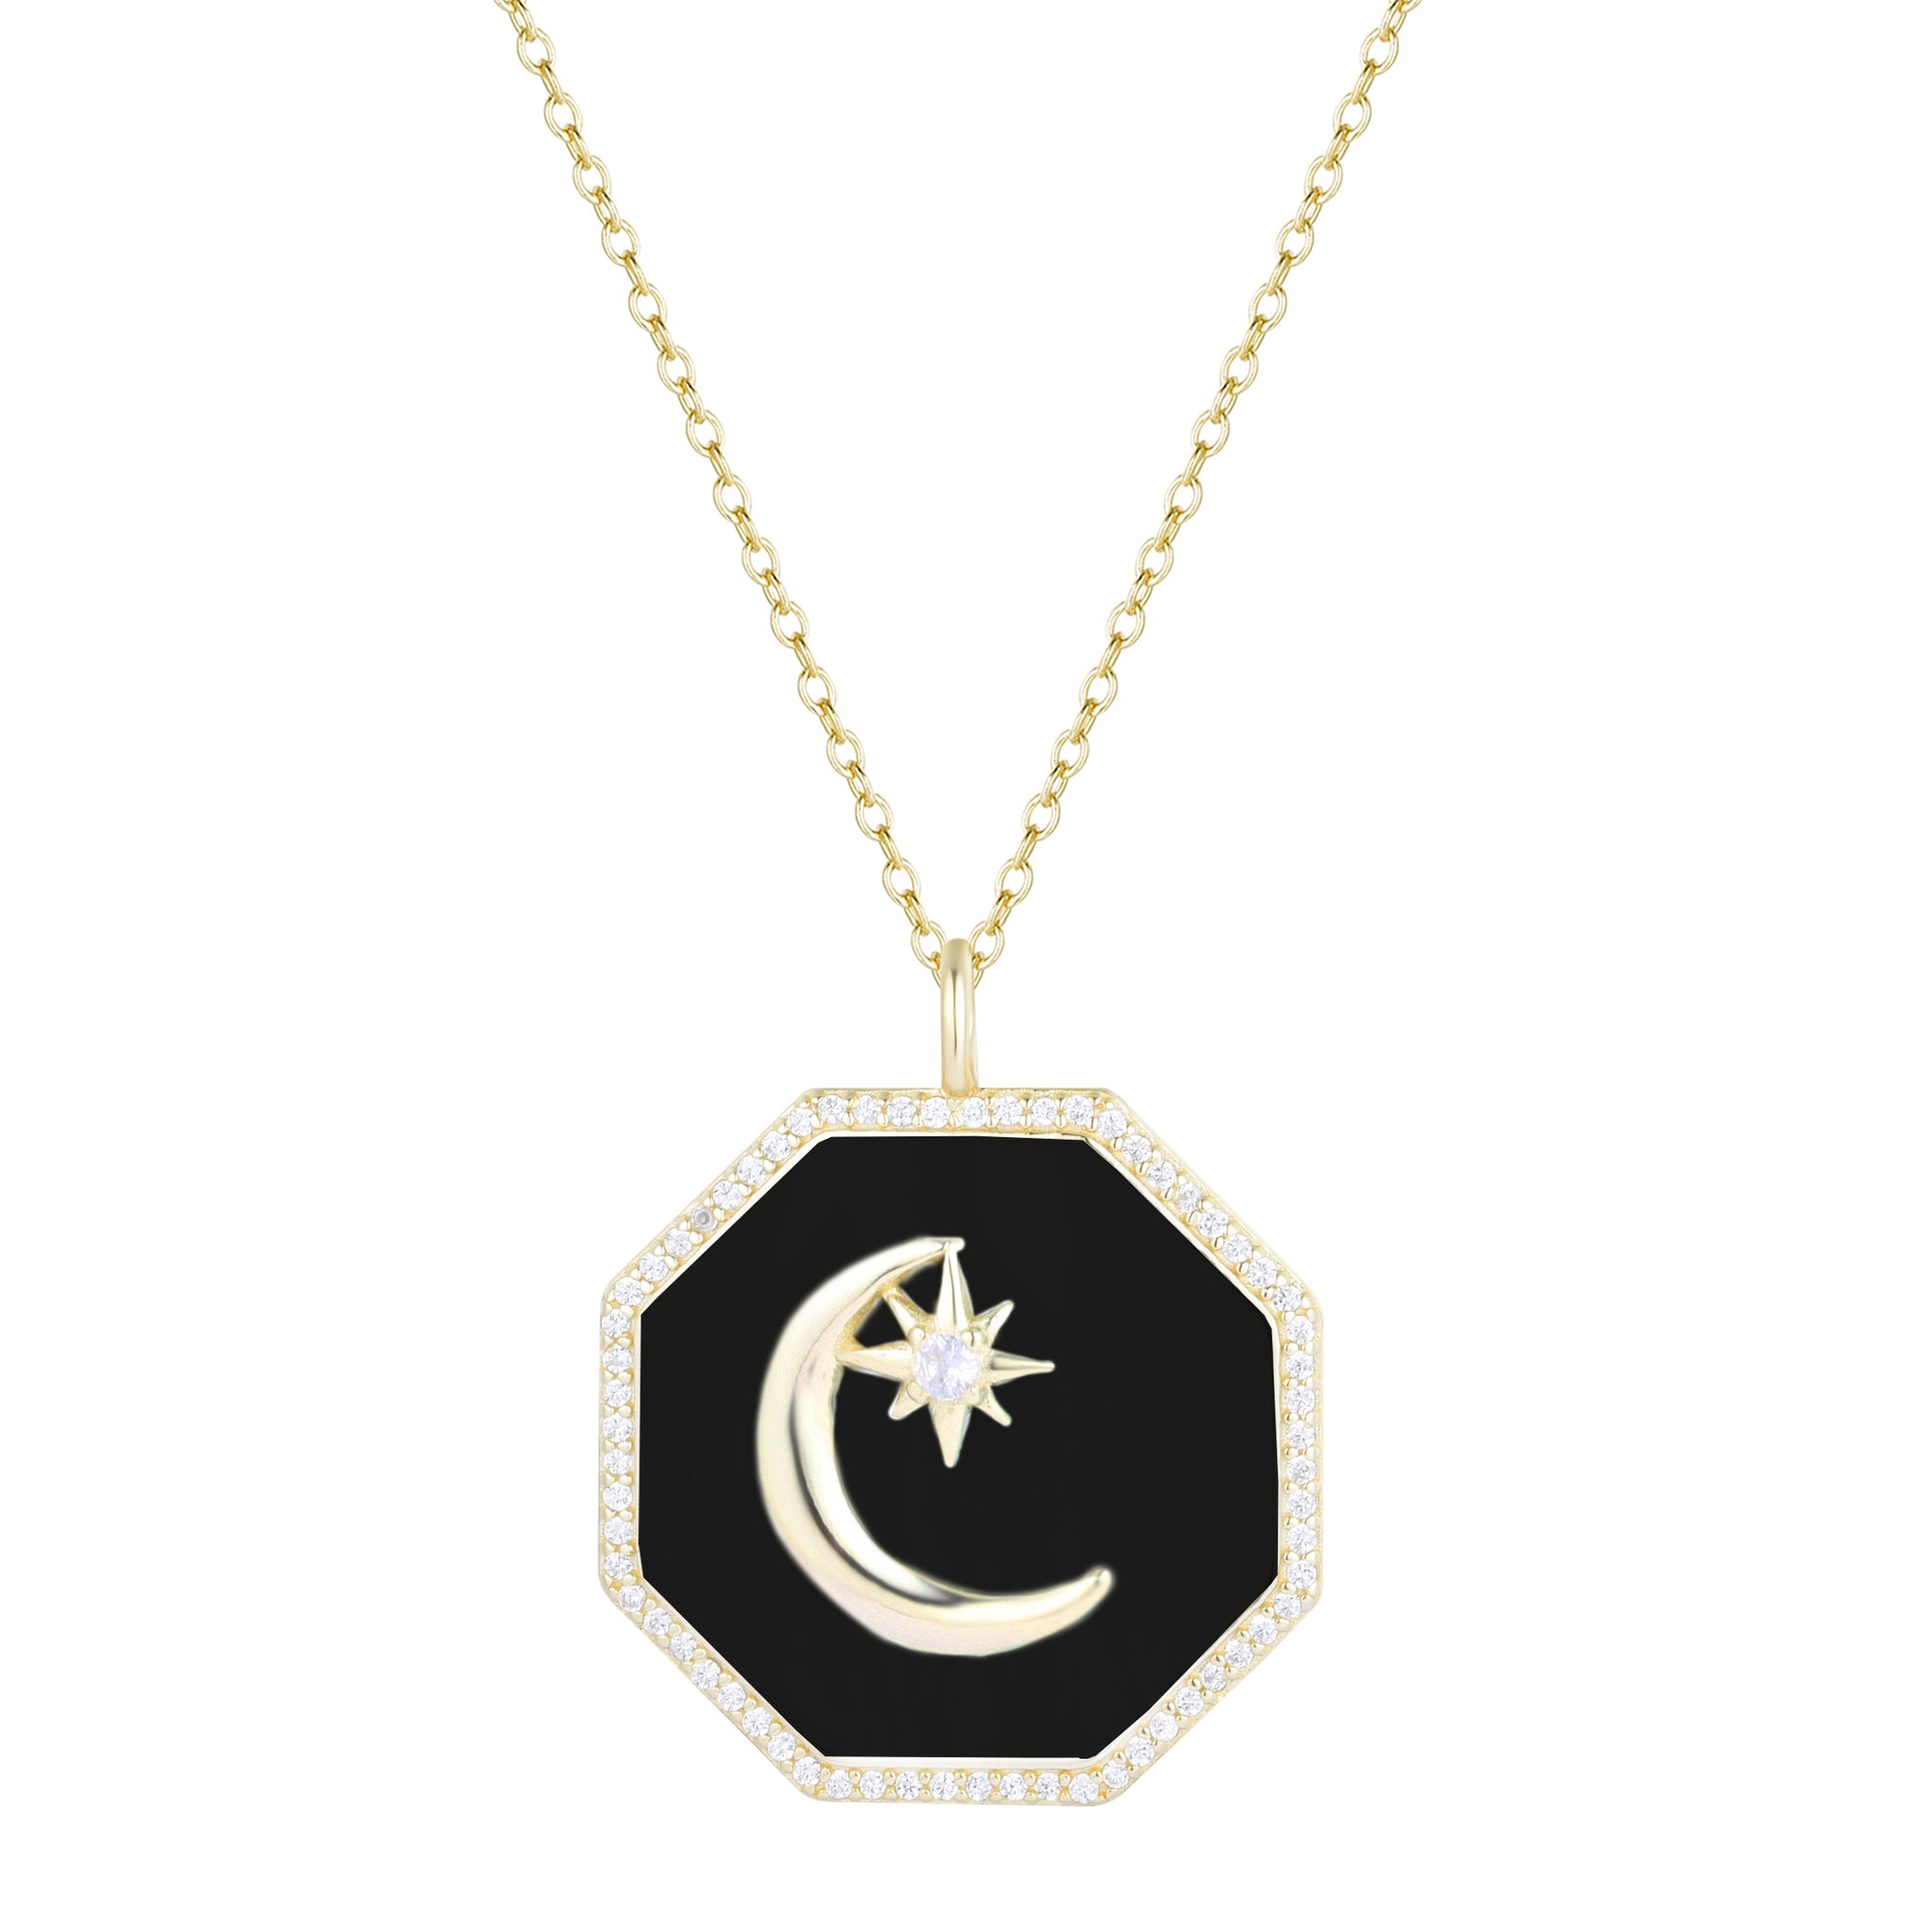 octagon moon and star necklace black enamel